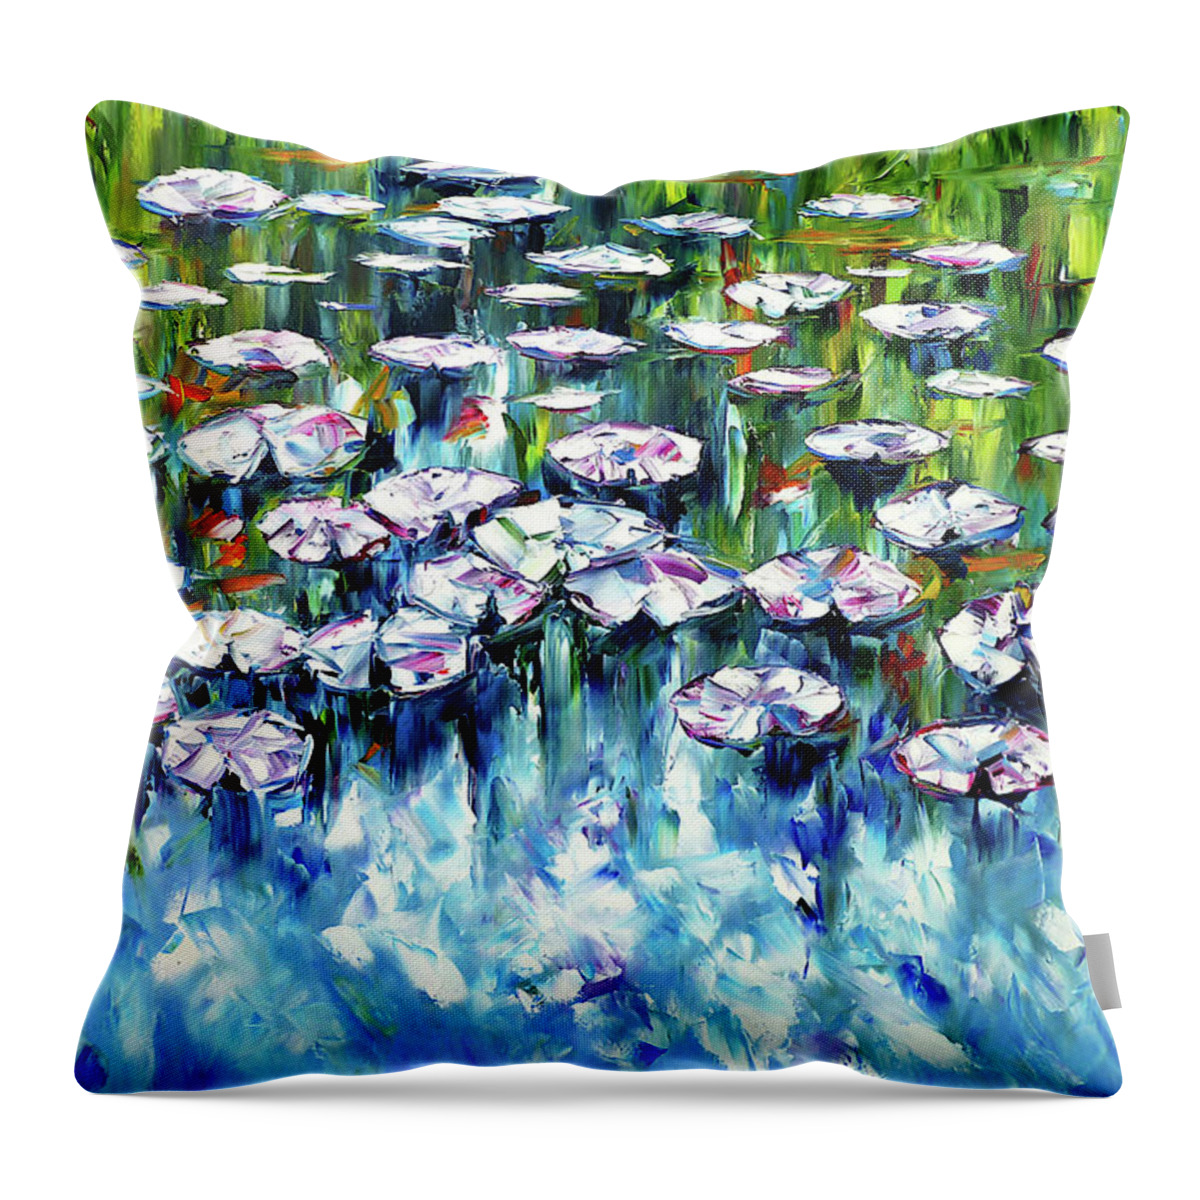 Pond Painting Throw Pillow featuring the painting Lily Pond by Mirek Kuzniar